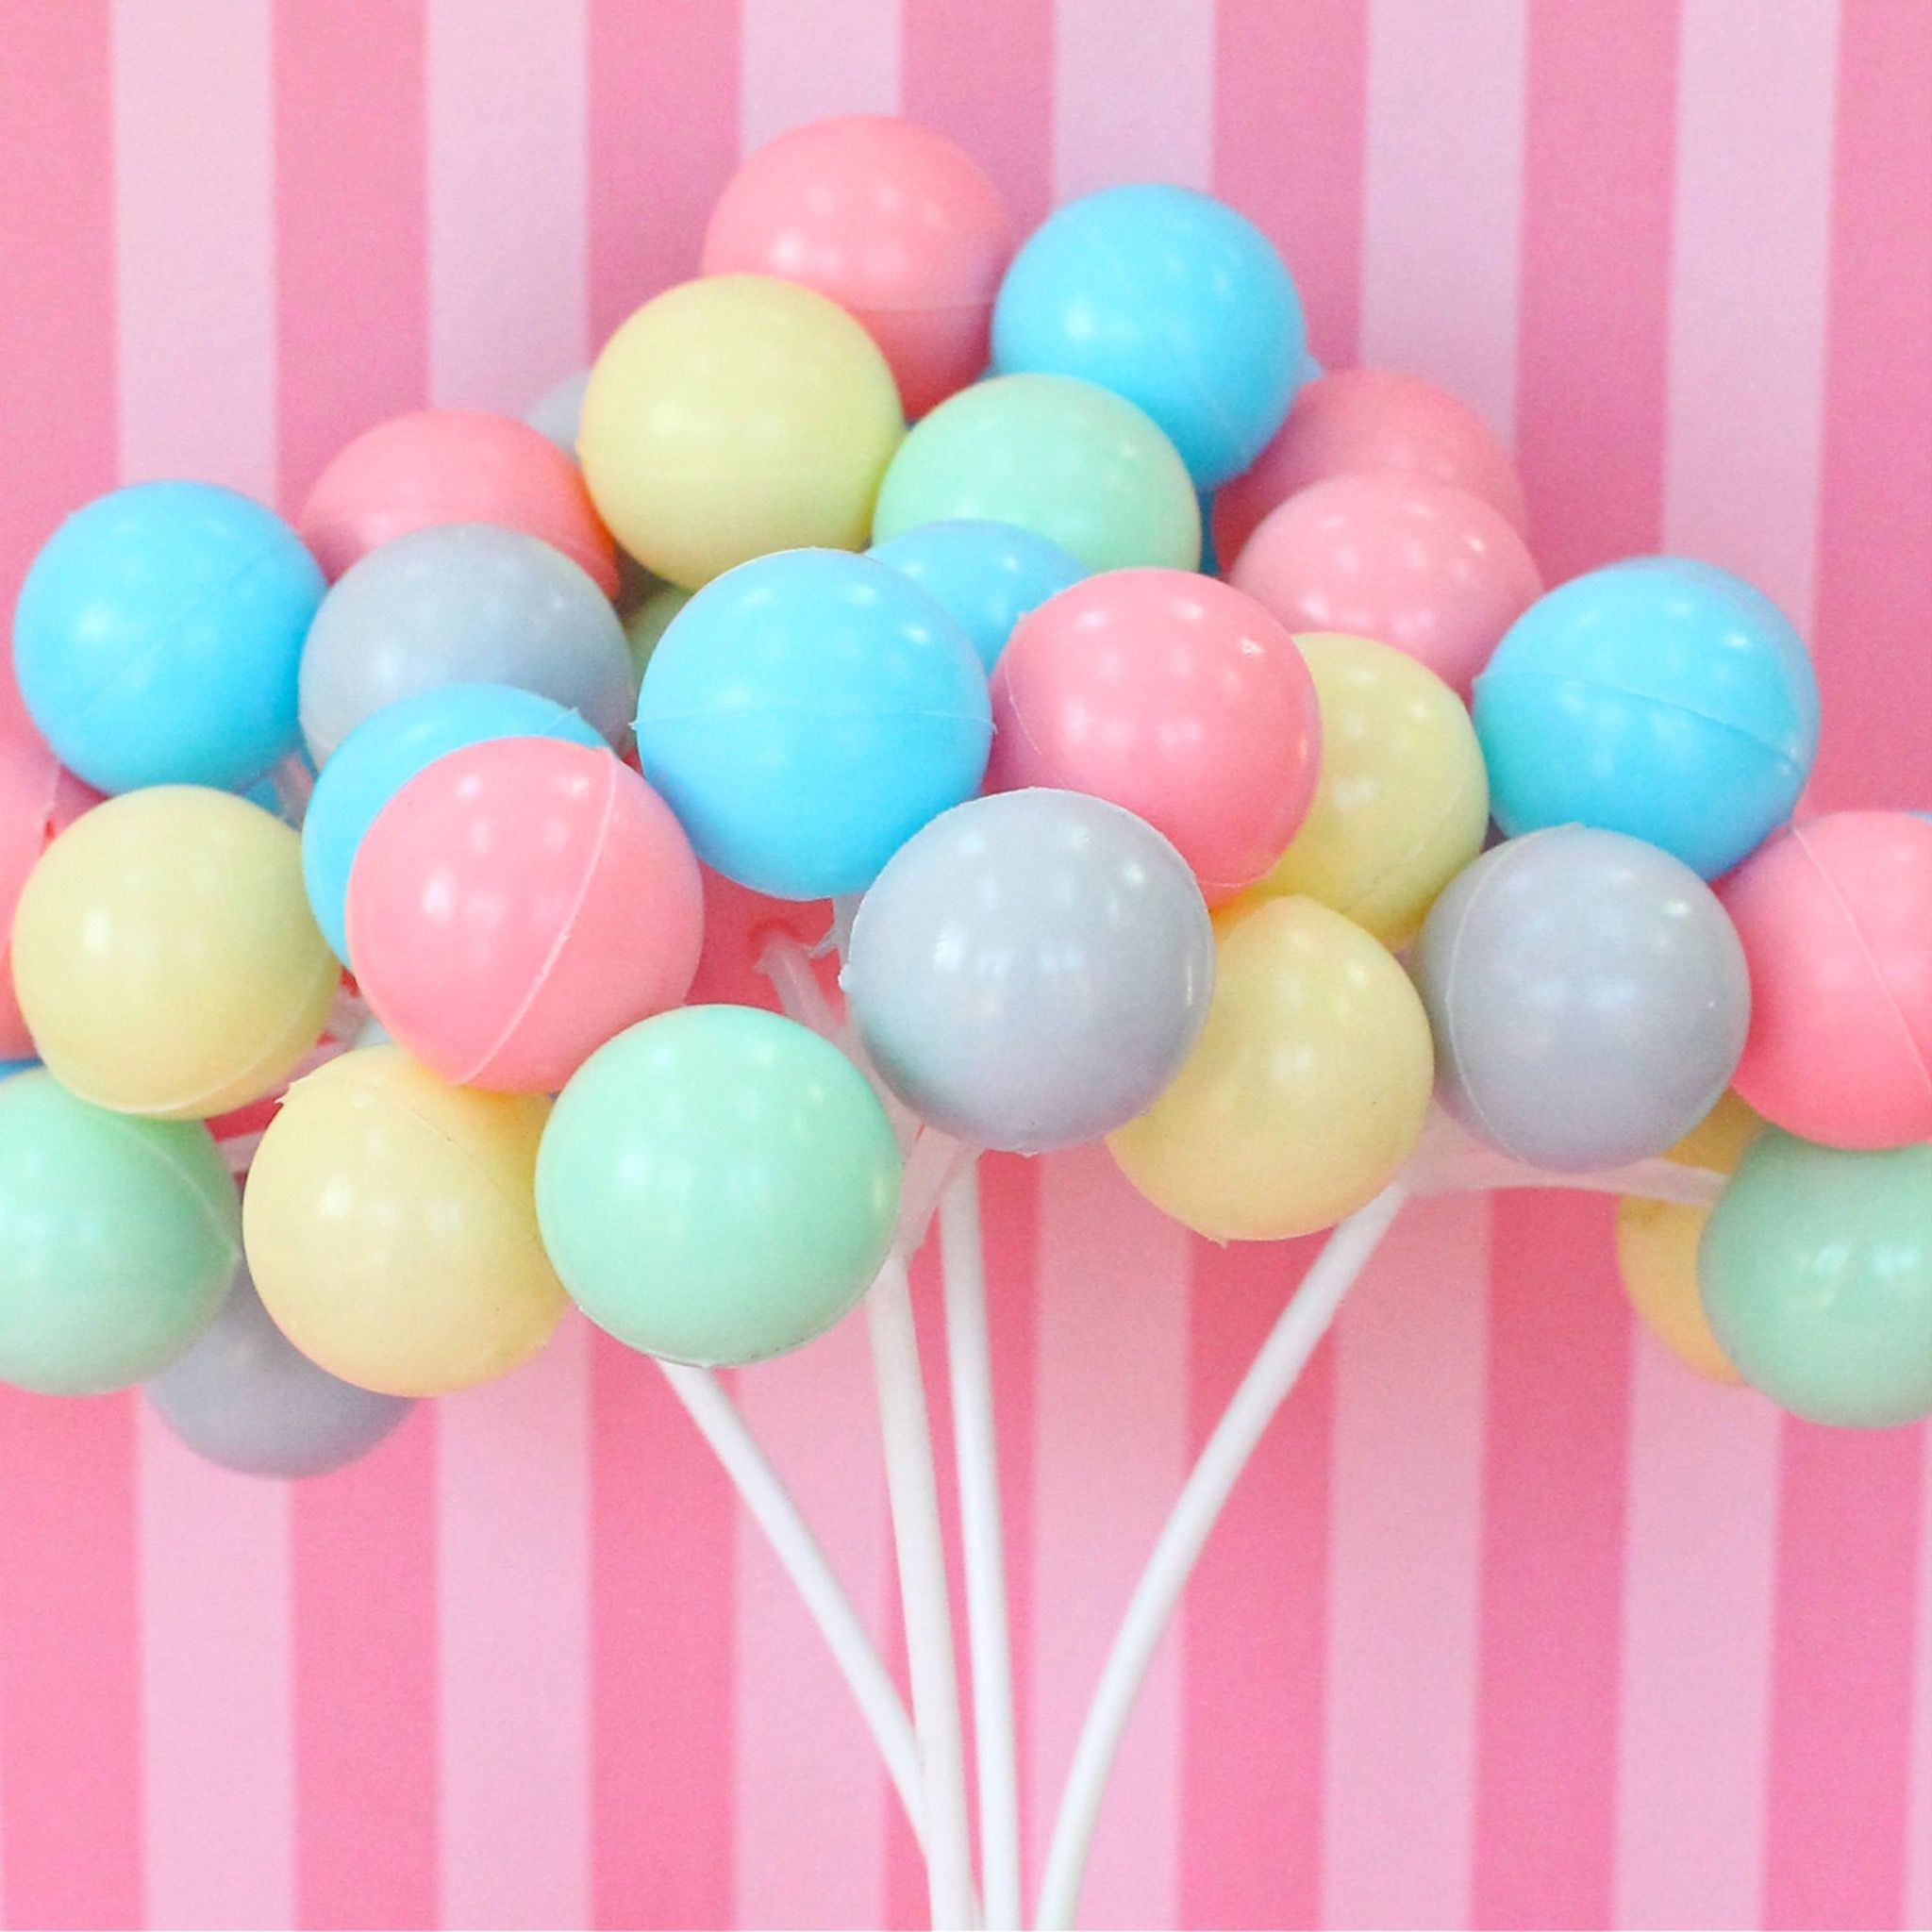 A bunch of balloons on sticks in front of a pink background - Balloons